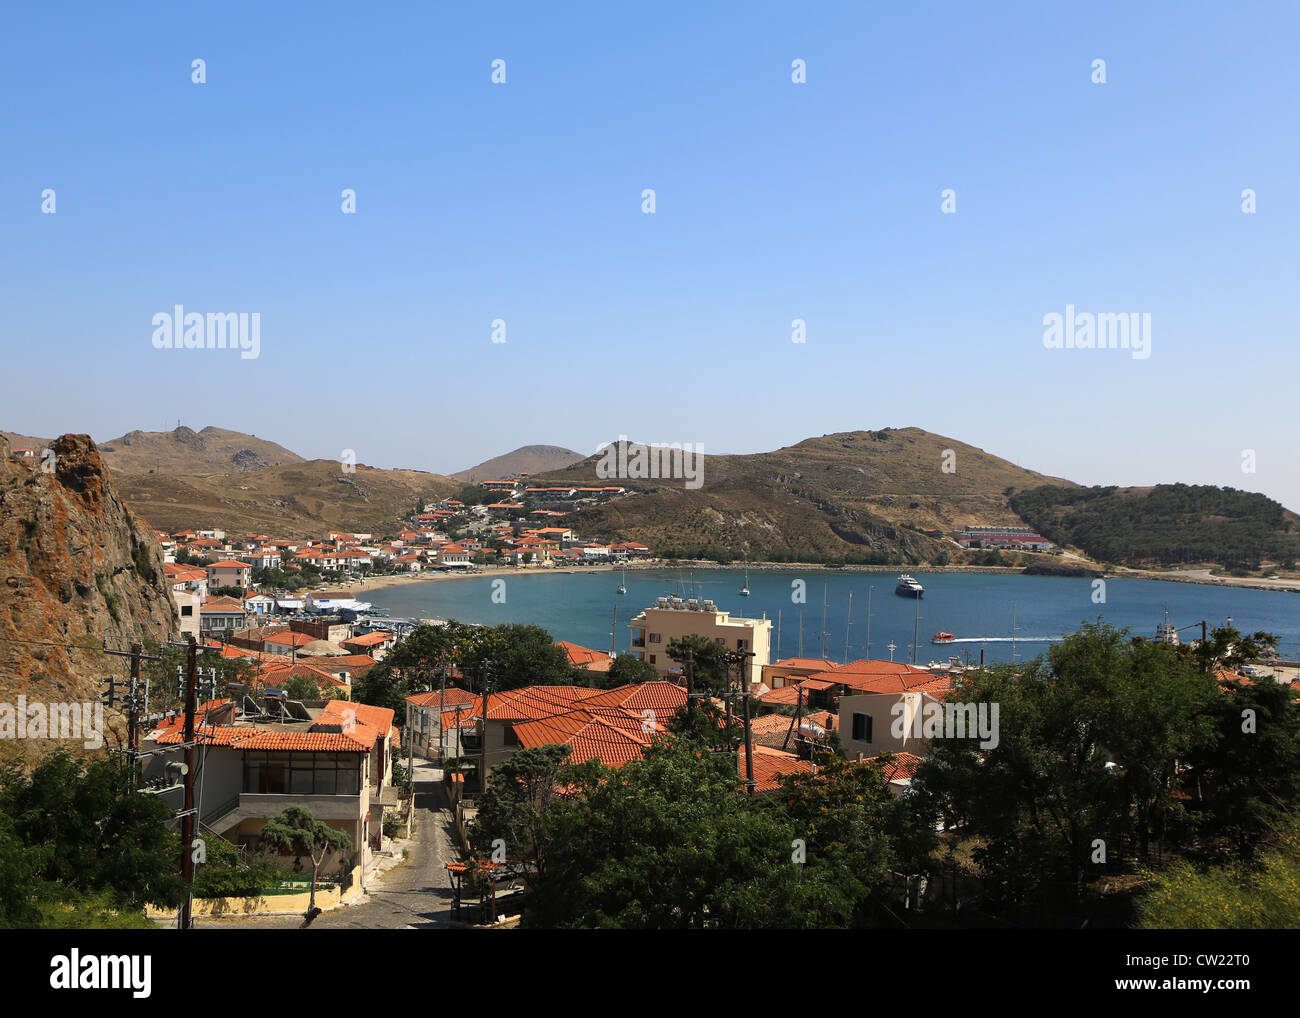 The fishing village of Myrina on the Greek island of Lemnos seen from above Stock Photo